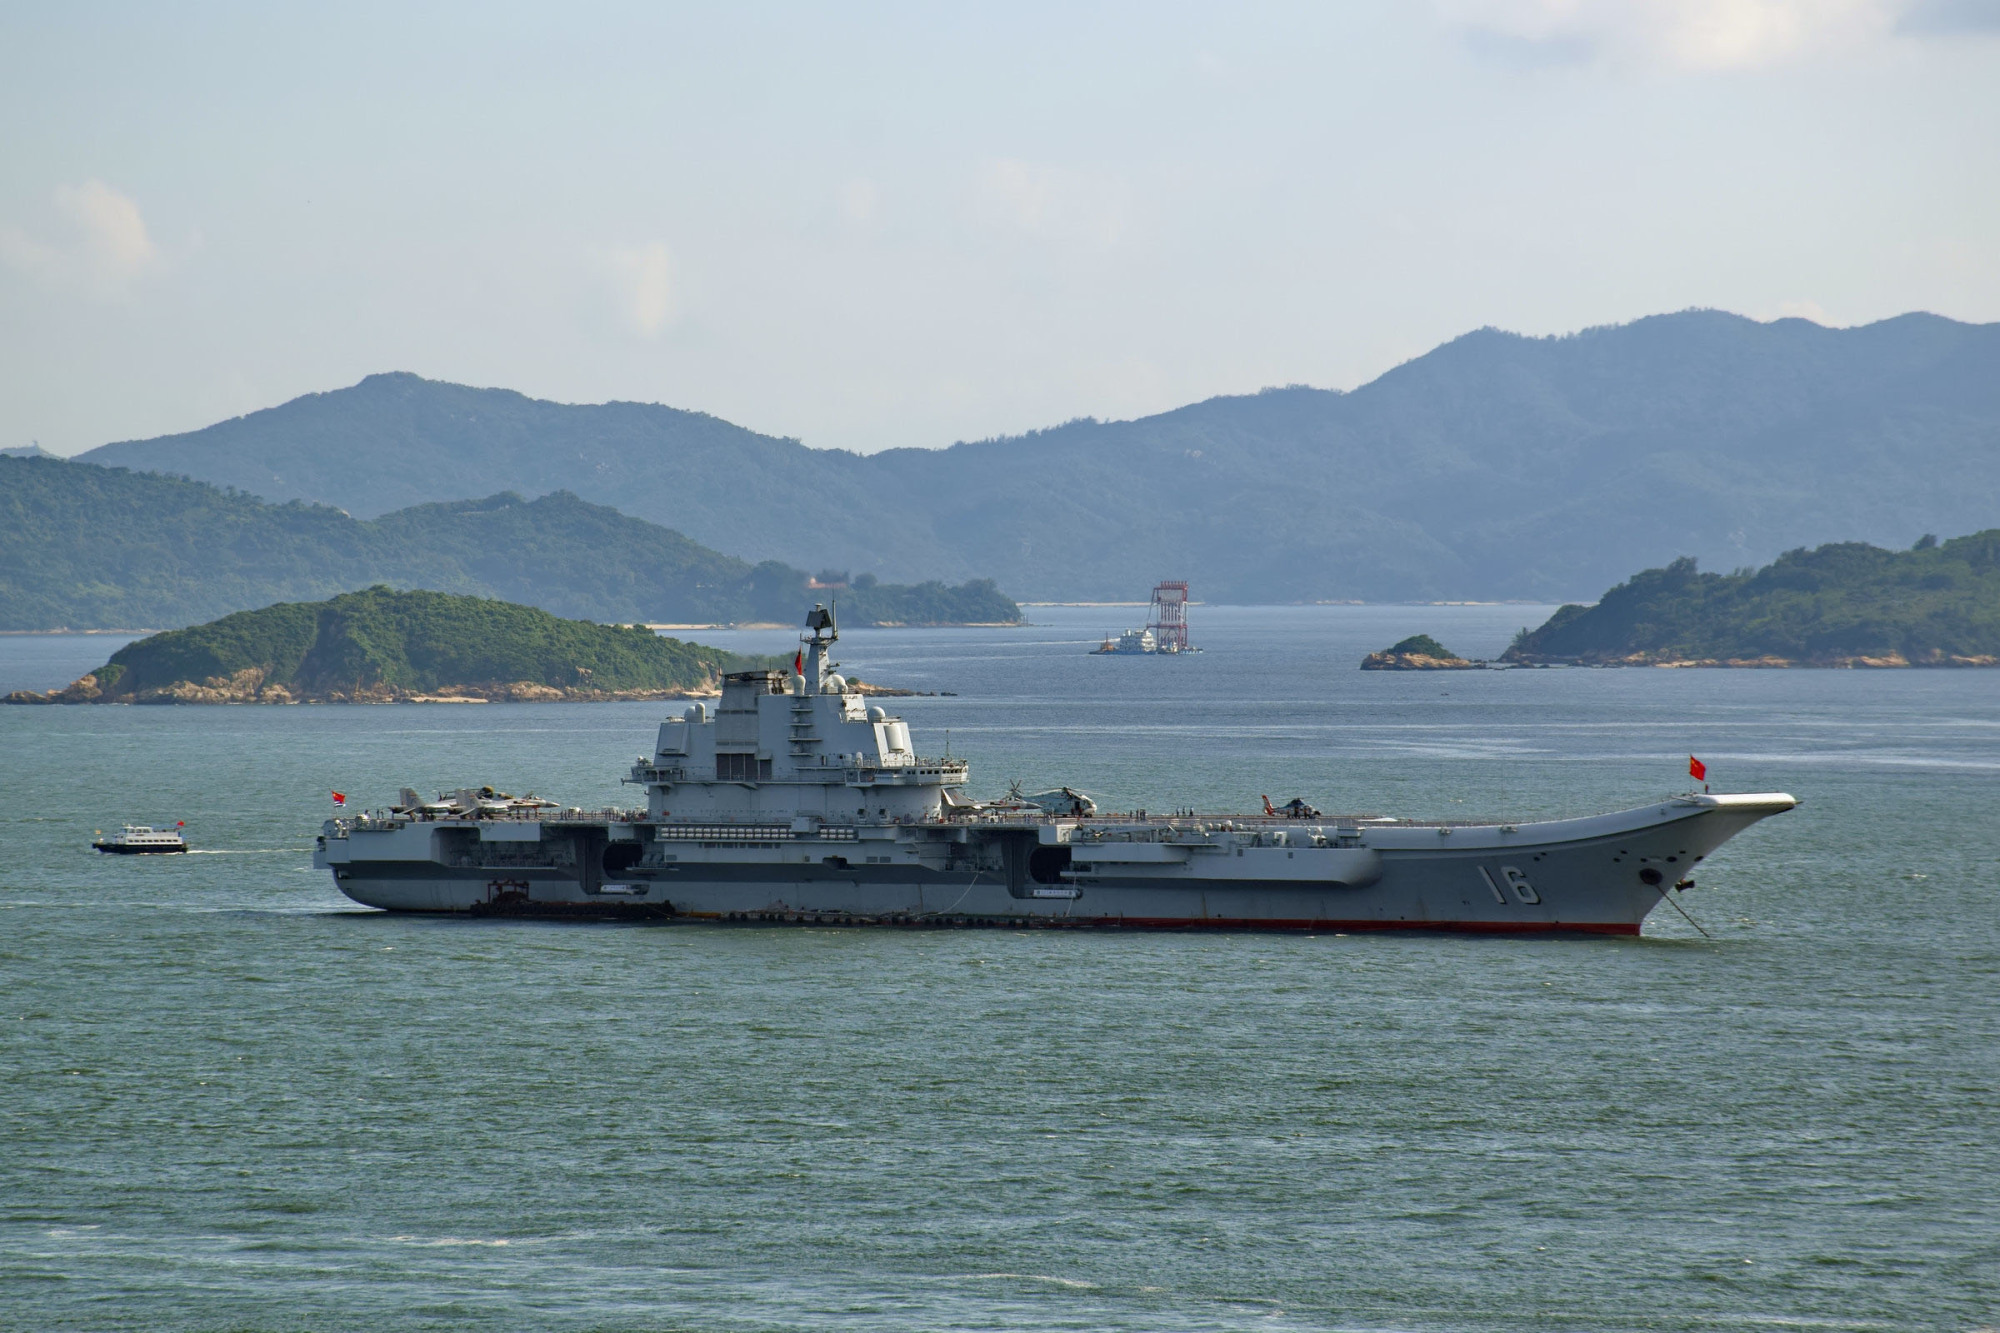 The Liaoning is the Chinese Navy's sole operational aircraft carrier now, but China plans to add three more aircraft carriers to its fleet by 2025 and may also deploy three amphibious assault ships capable of carrying combat aircraft. | BAYCREST VIA WIKIMEDIA COMMONS / CC-BY-SA-2.5